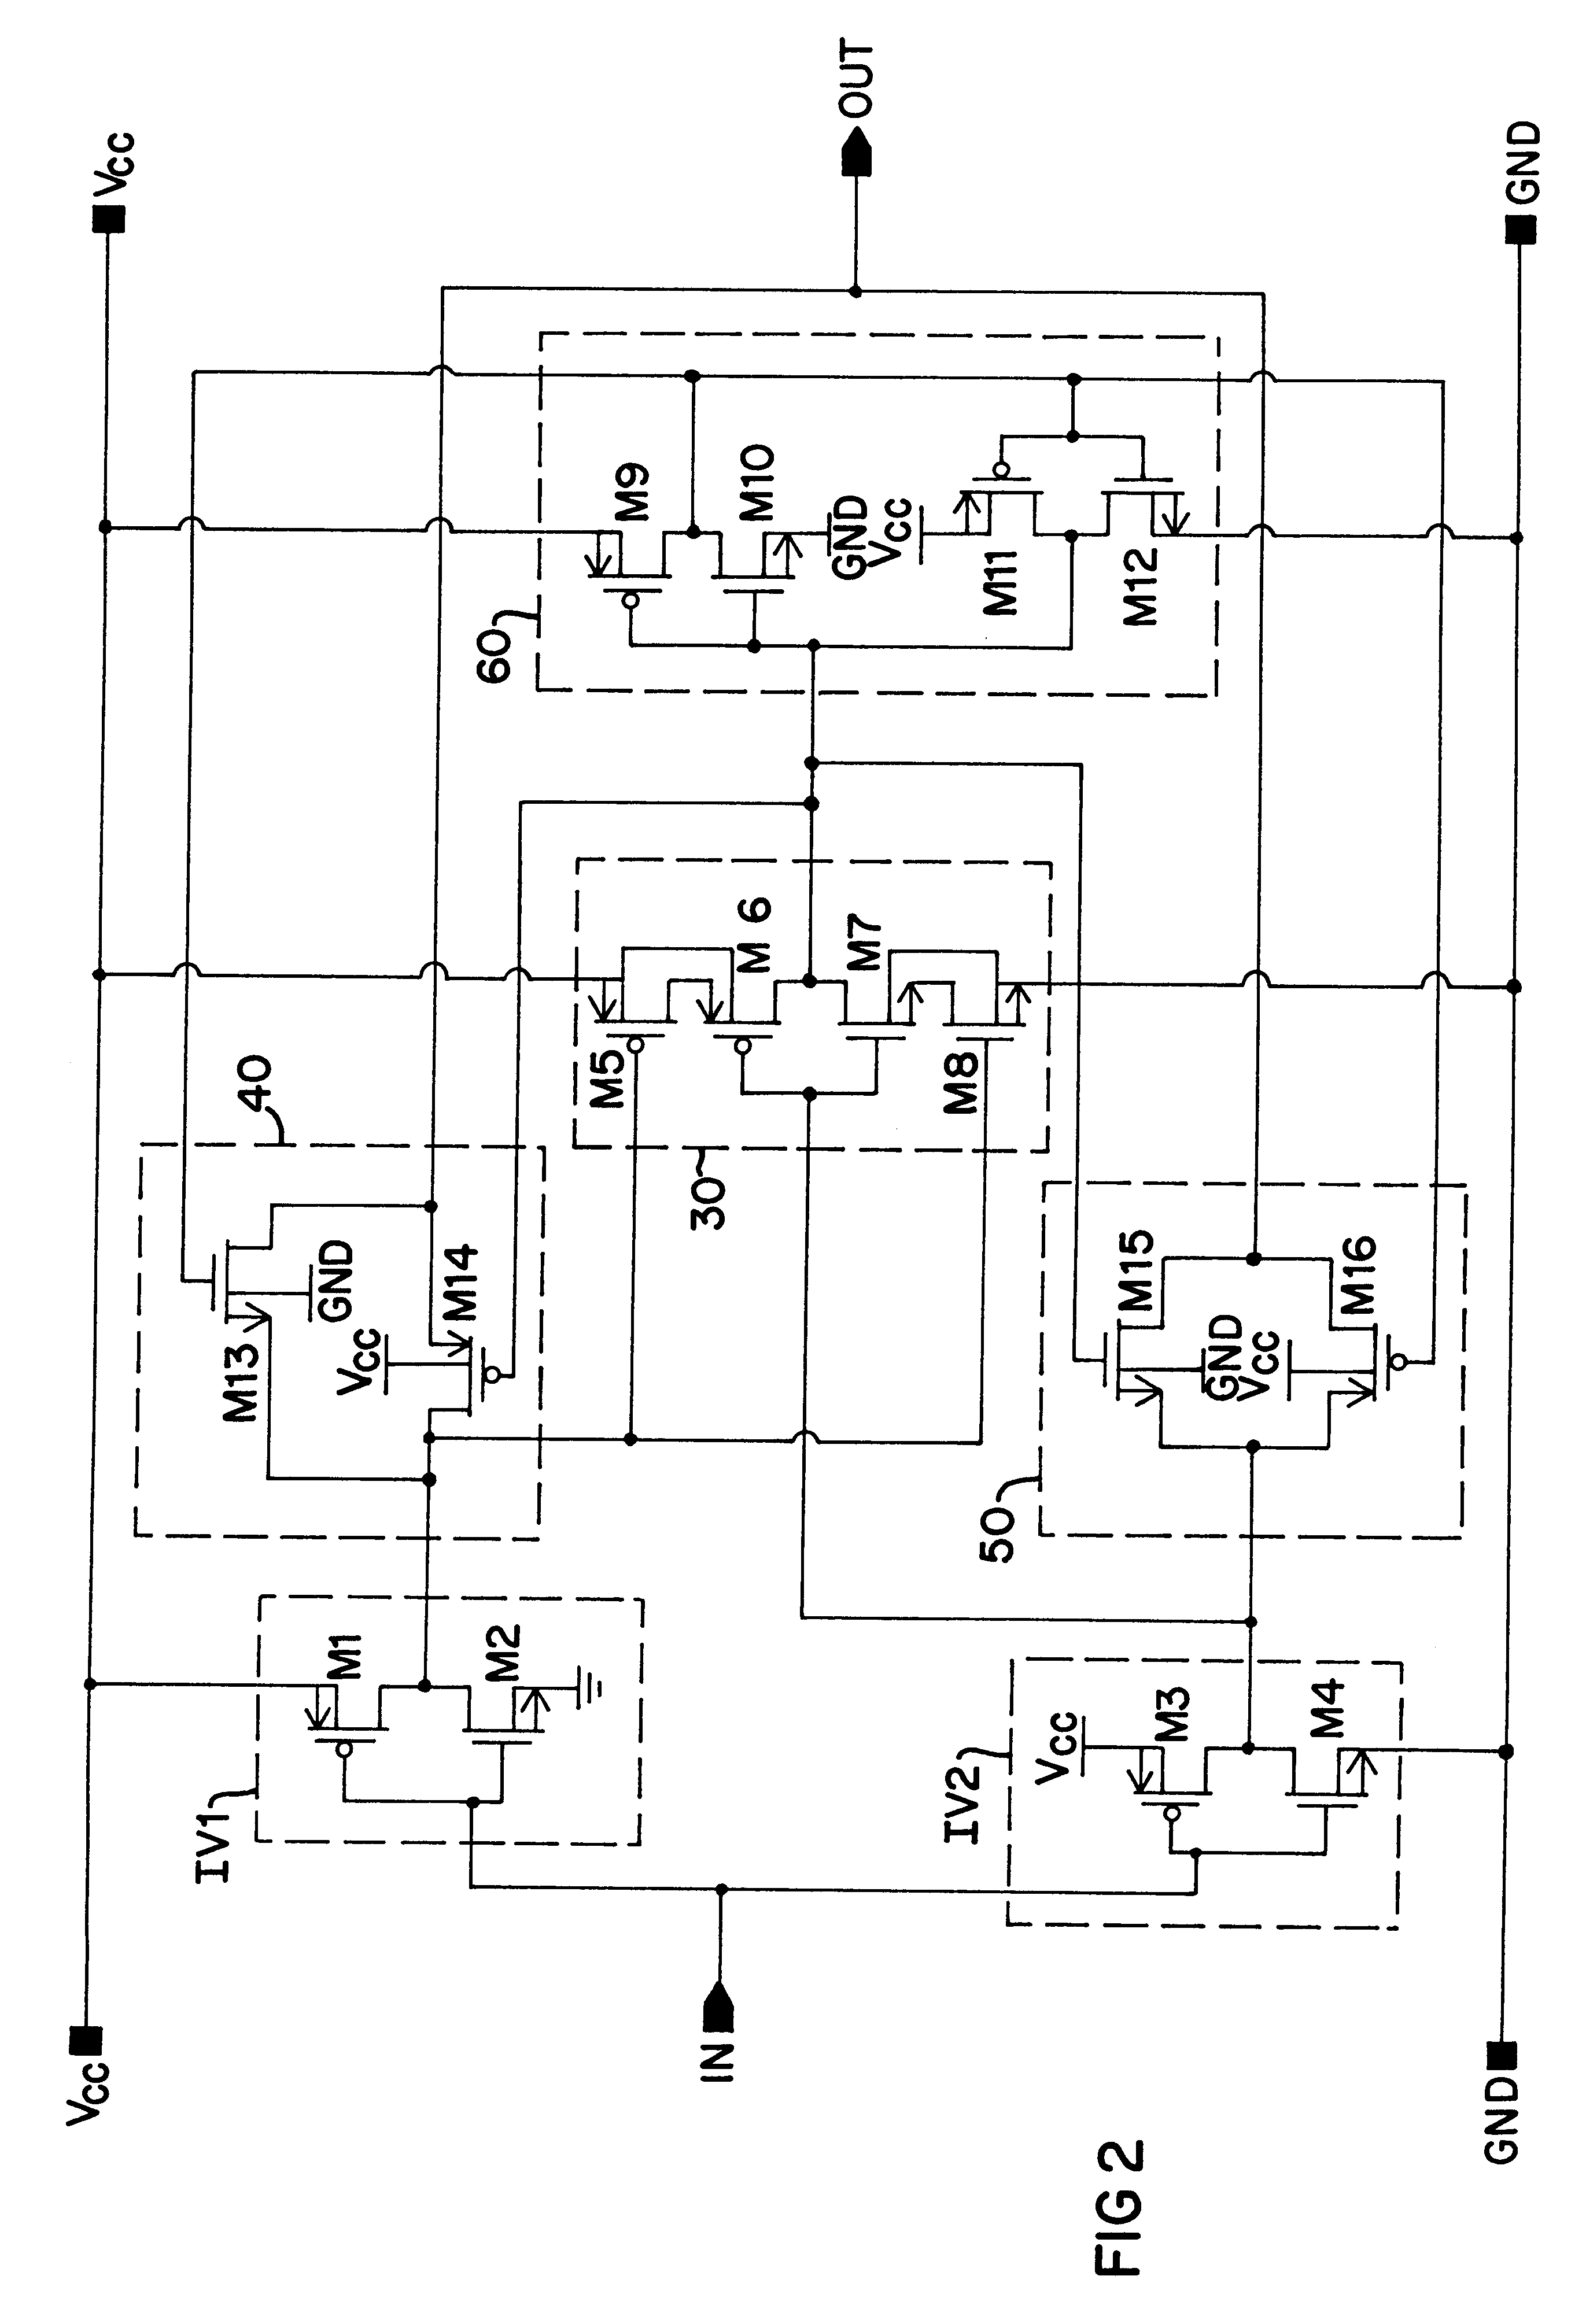 Circuit for dynamic switching of a buffer threshold